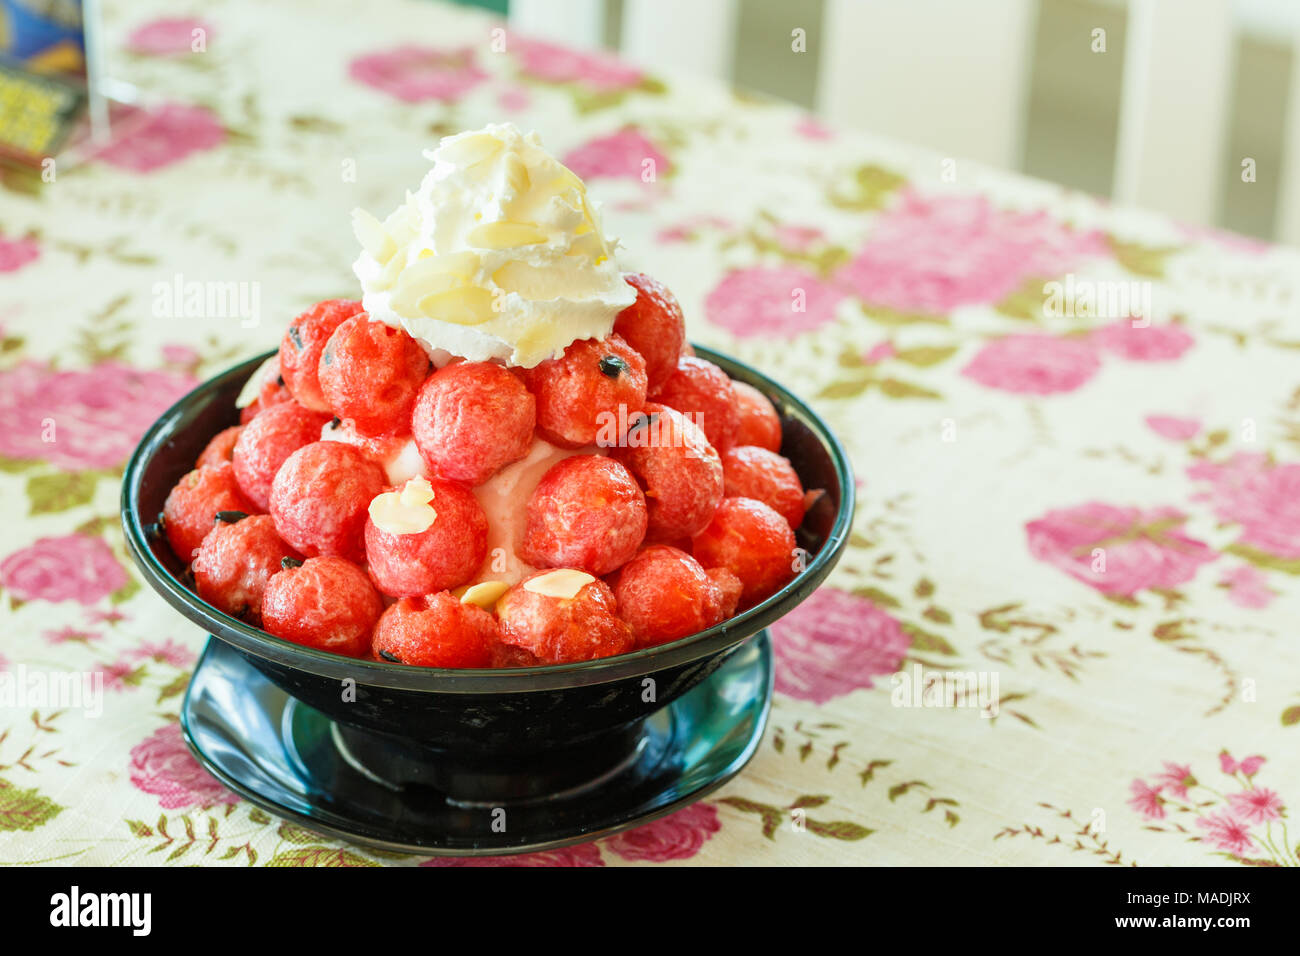 Watermelon on Shaved ice Stock Photo